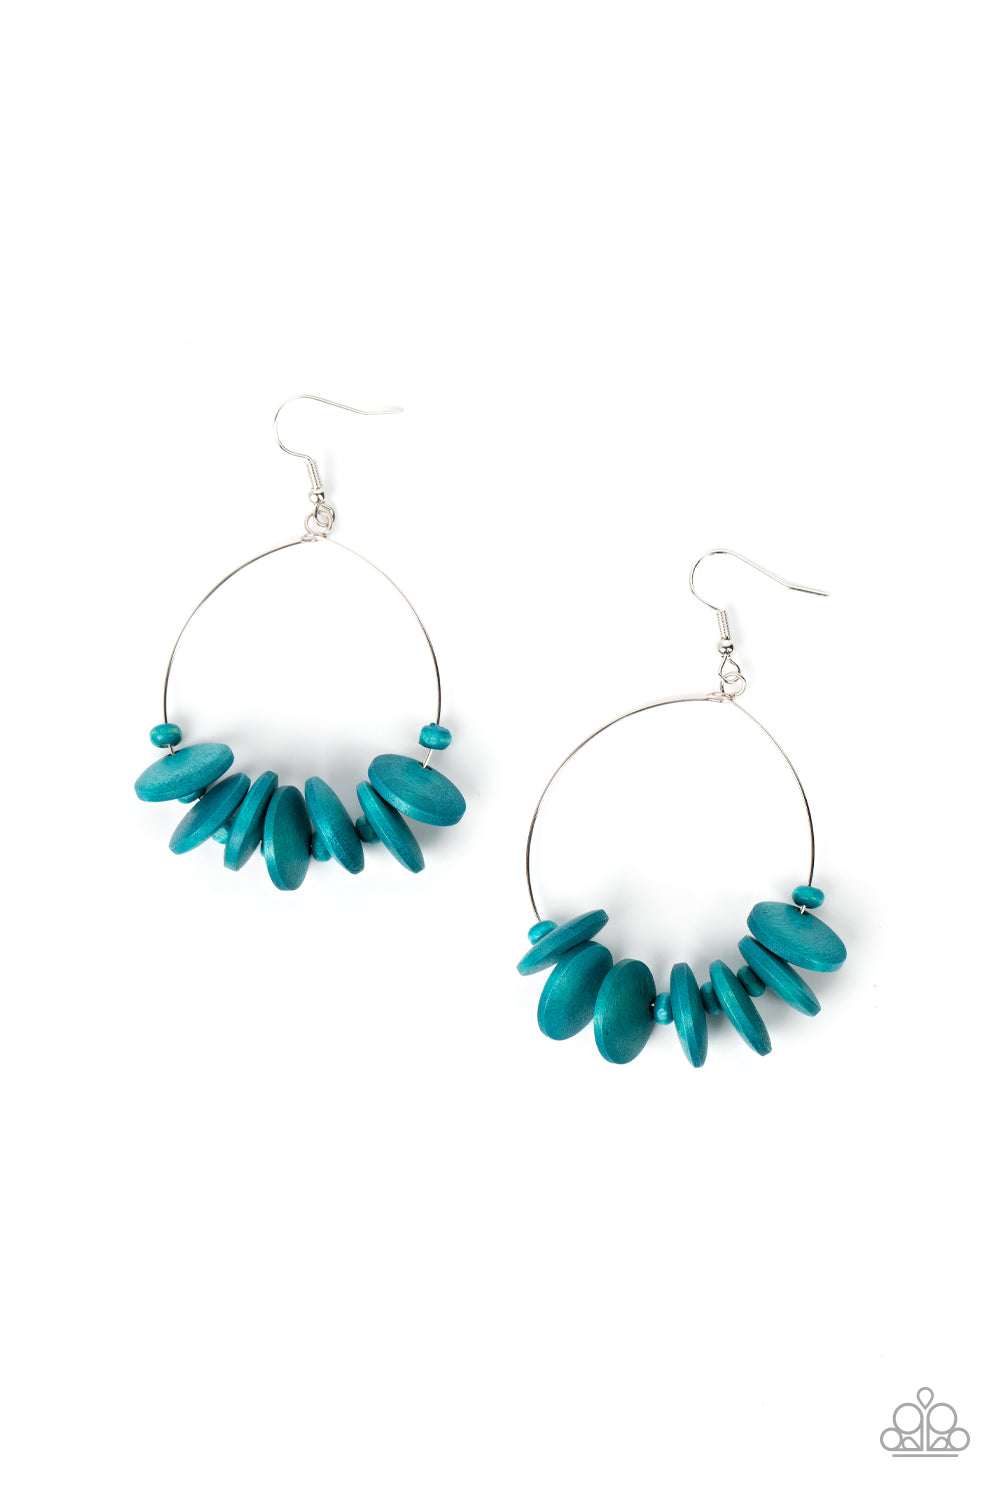 Surf Camp - blue - Paparazzi earrings